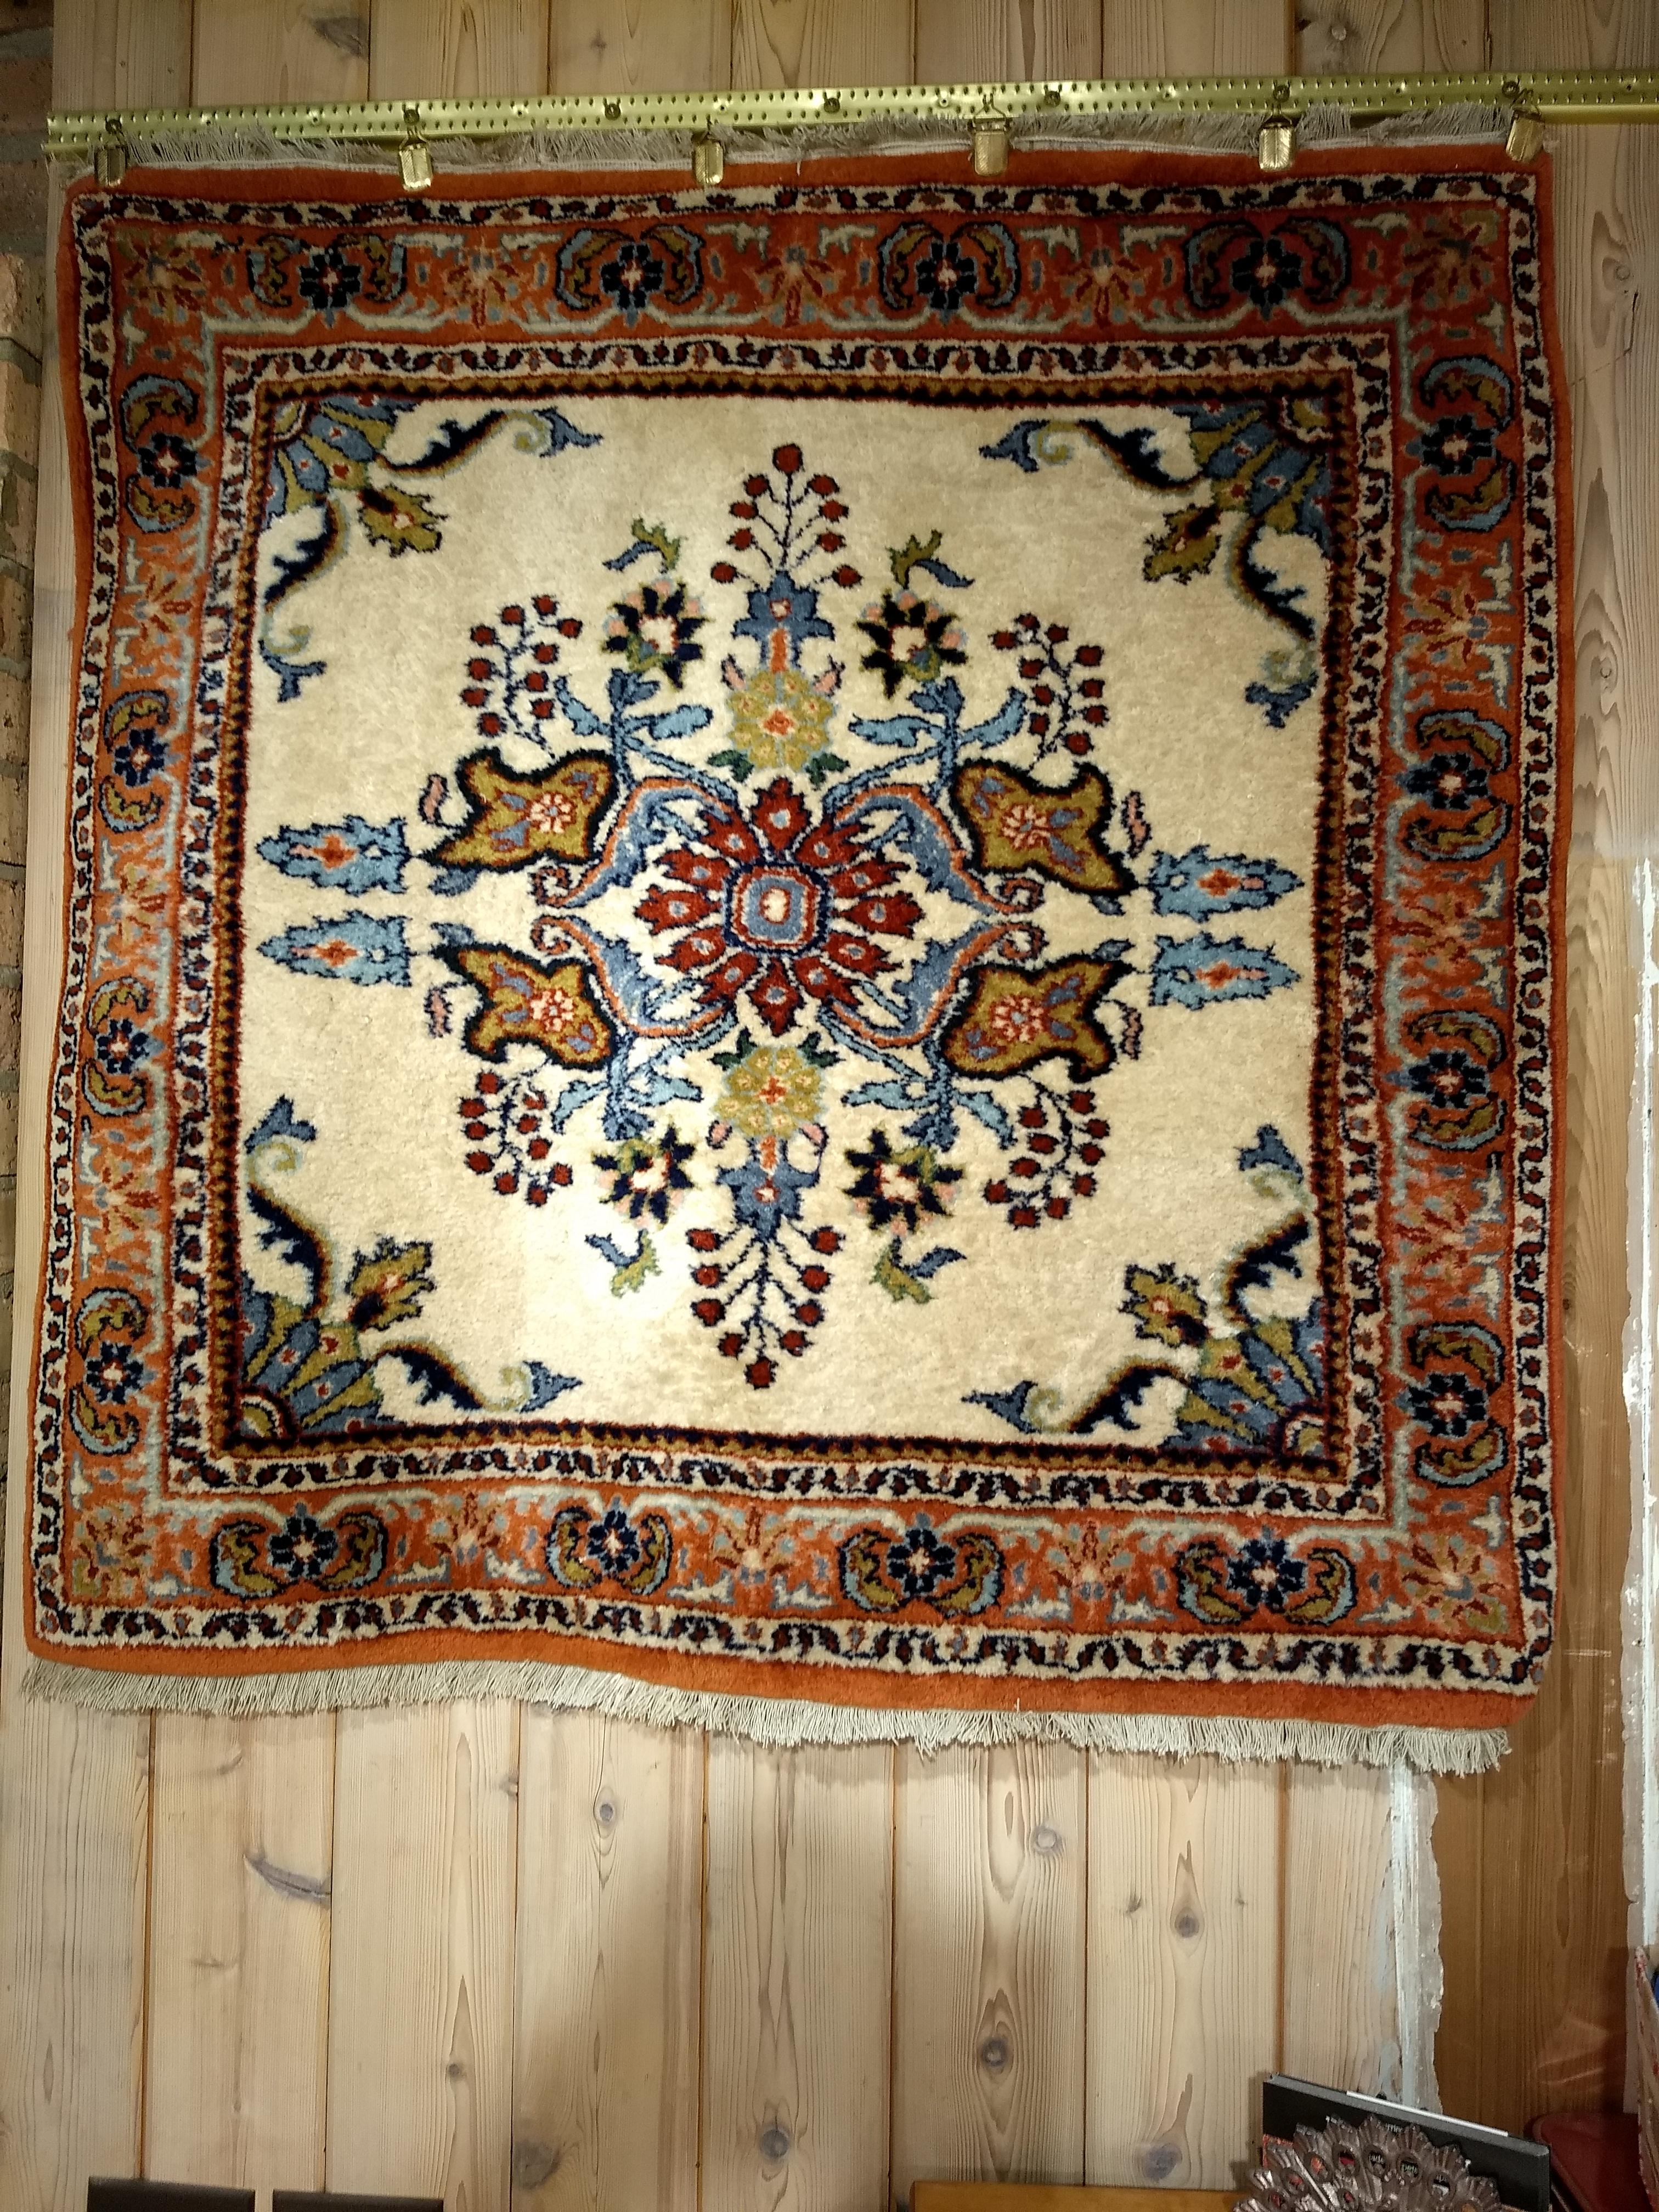 Vintage “square-size” Persian Sarouk area rug in floral pattern with an ivory background.  The rug has an “open design” field with a large central medallion set on an ivory color field with floral design  in baby blue, brown, green, and red.  The